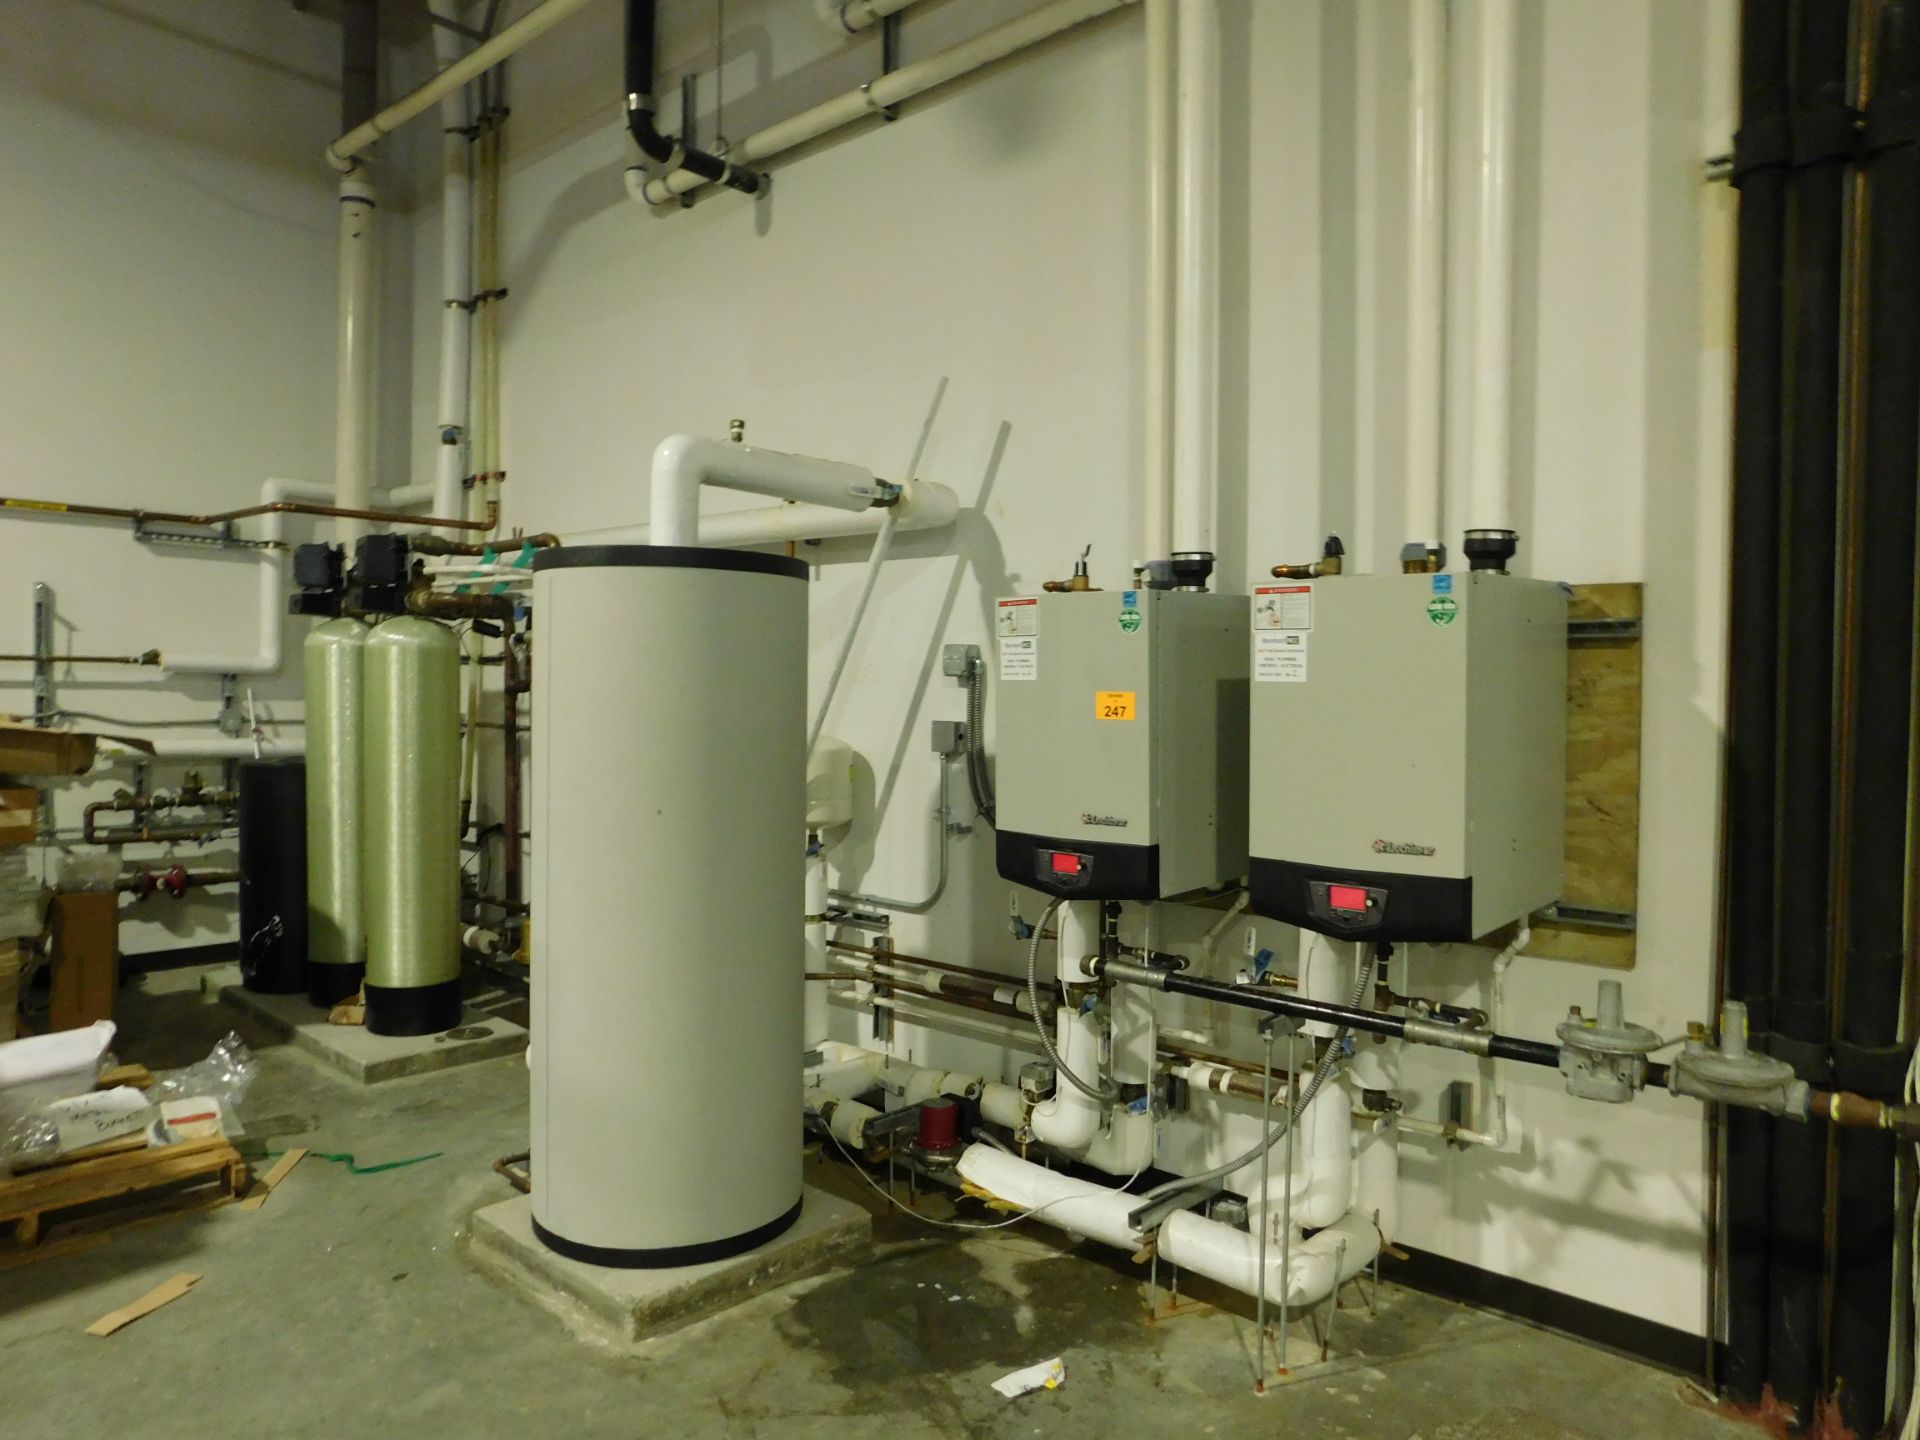 Water Softener System - Image 4 of 4